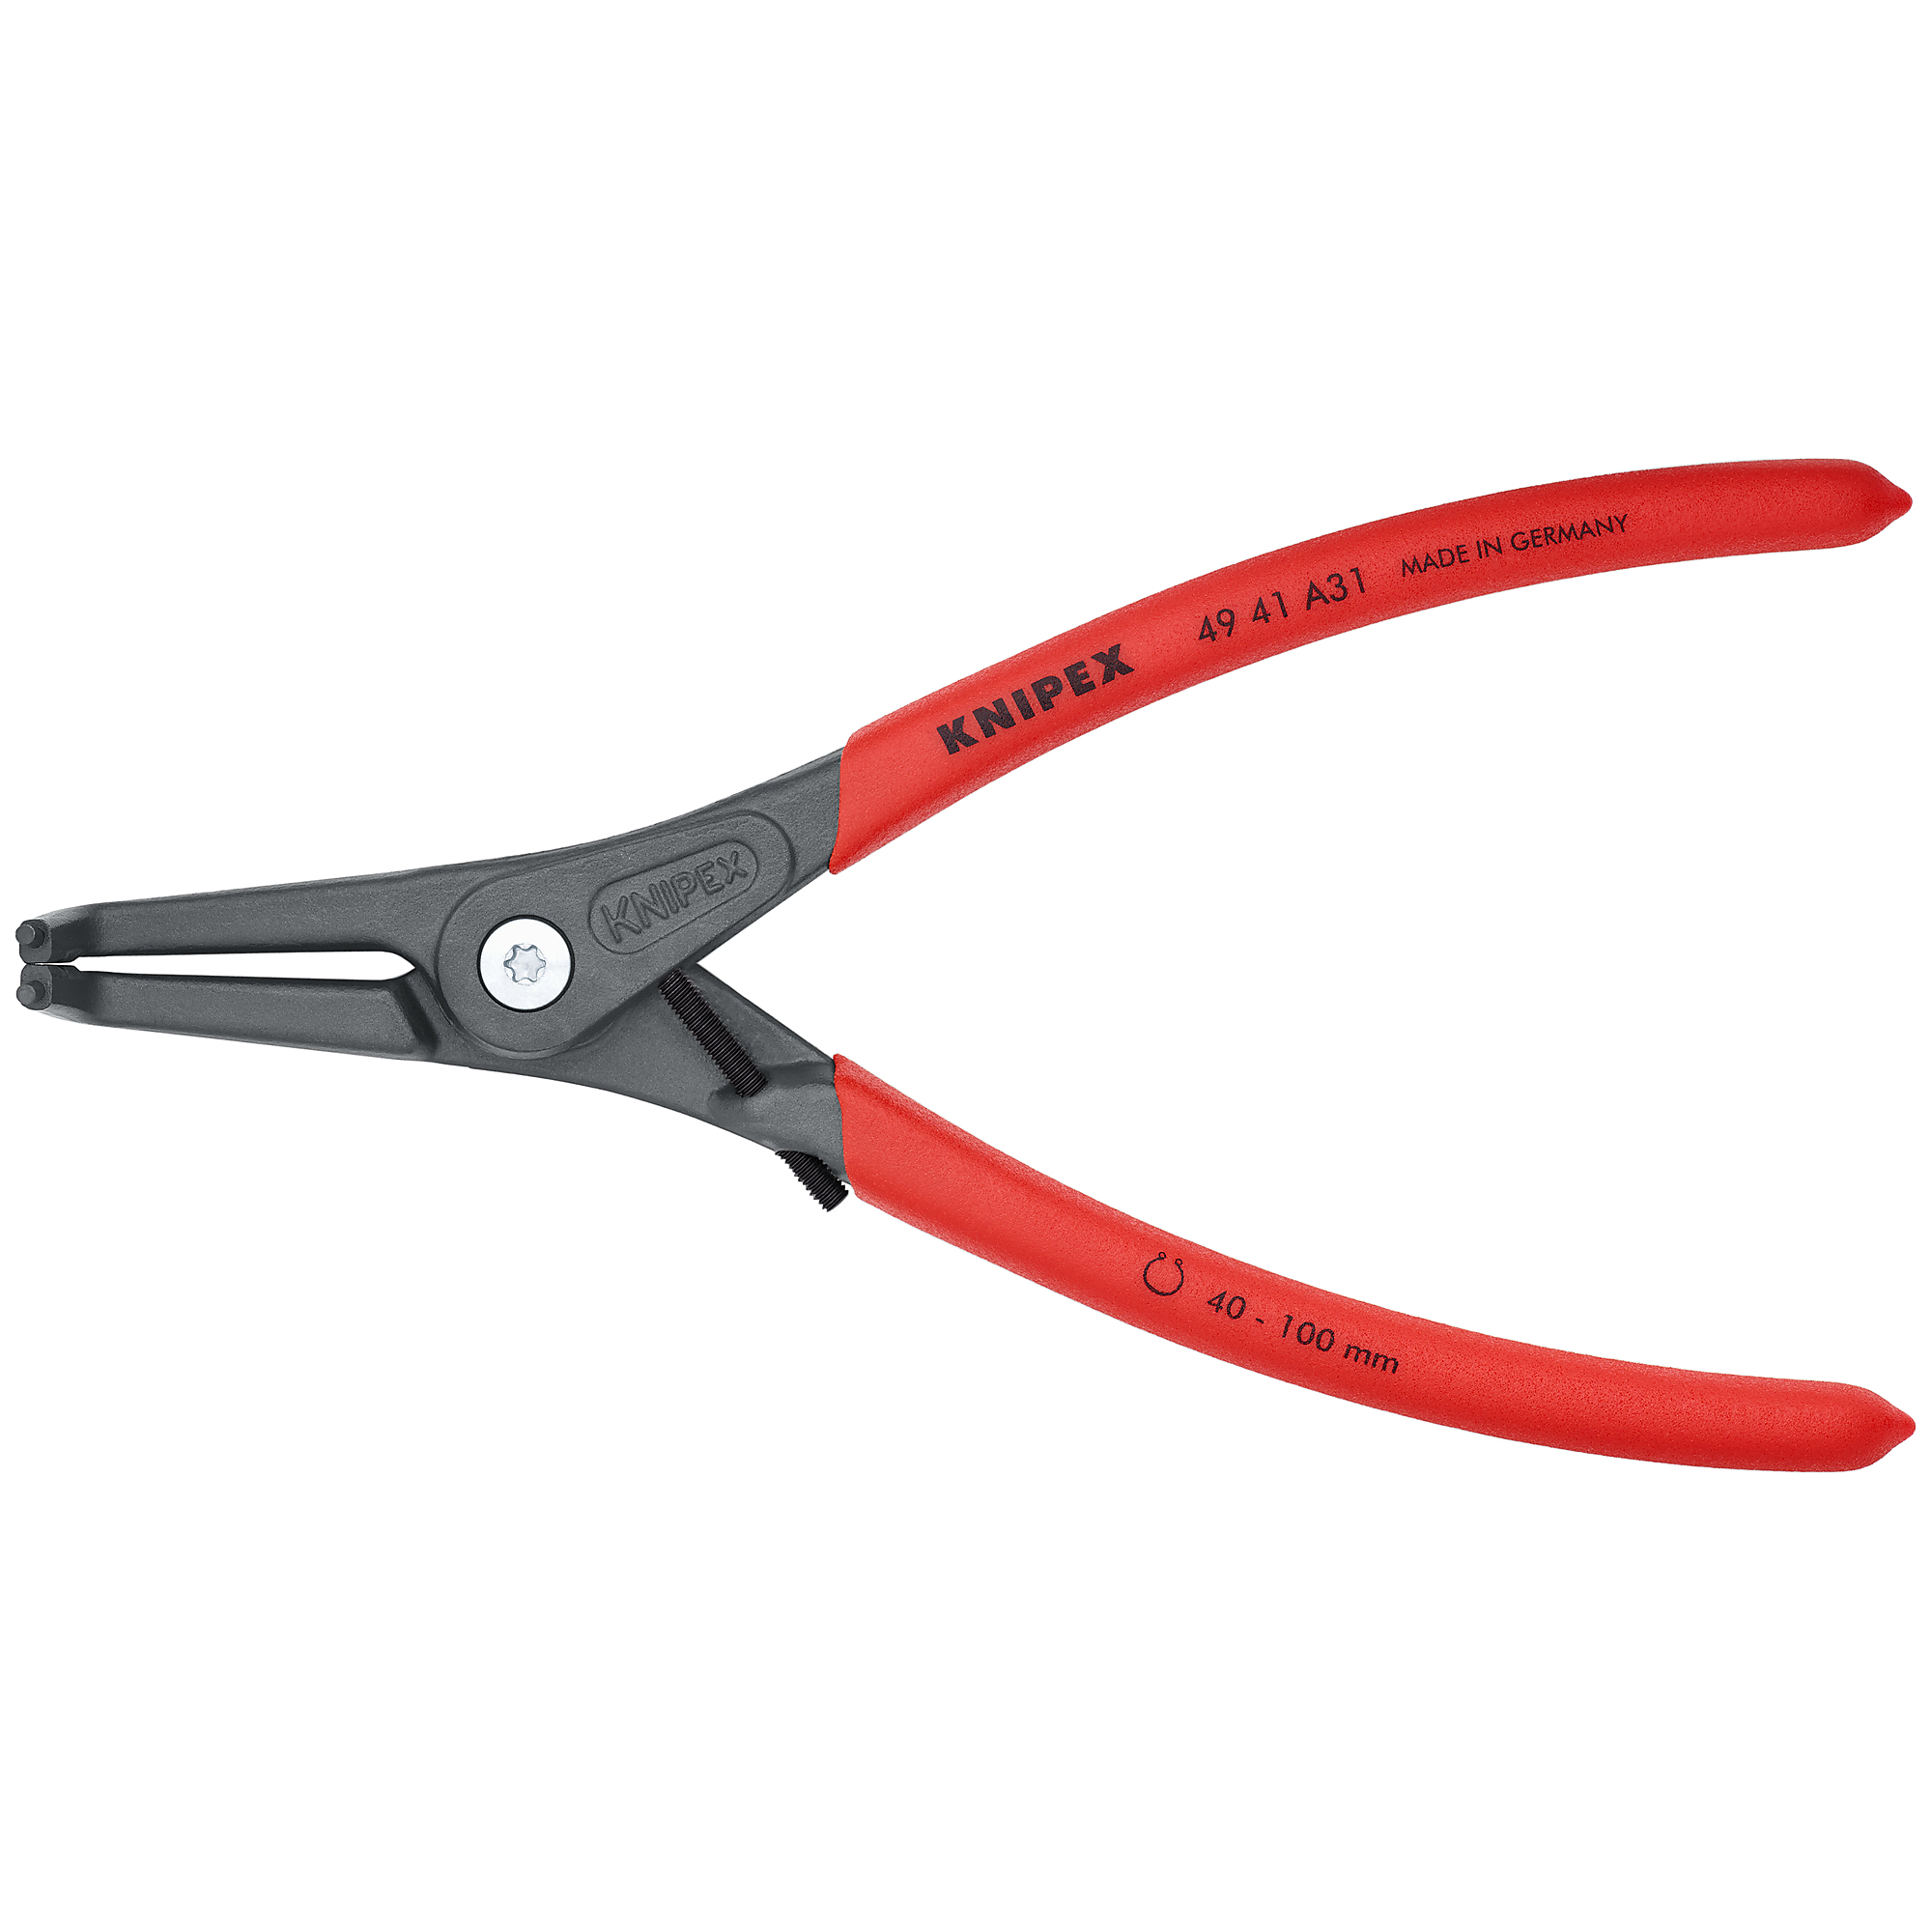 KNIPEX, Ext 90Â°Prec.Snap Ring Plrs-Limiter,3/32 tip,8.5Inch, Pieces (qty.) 1 Material Steel, Model 49 41 A31